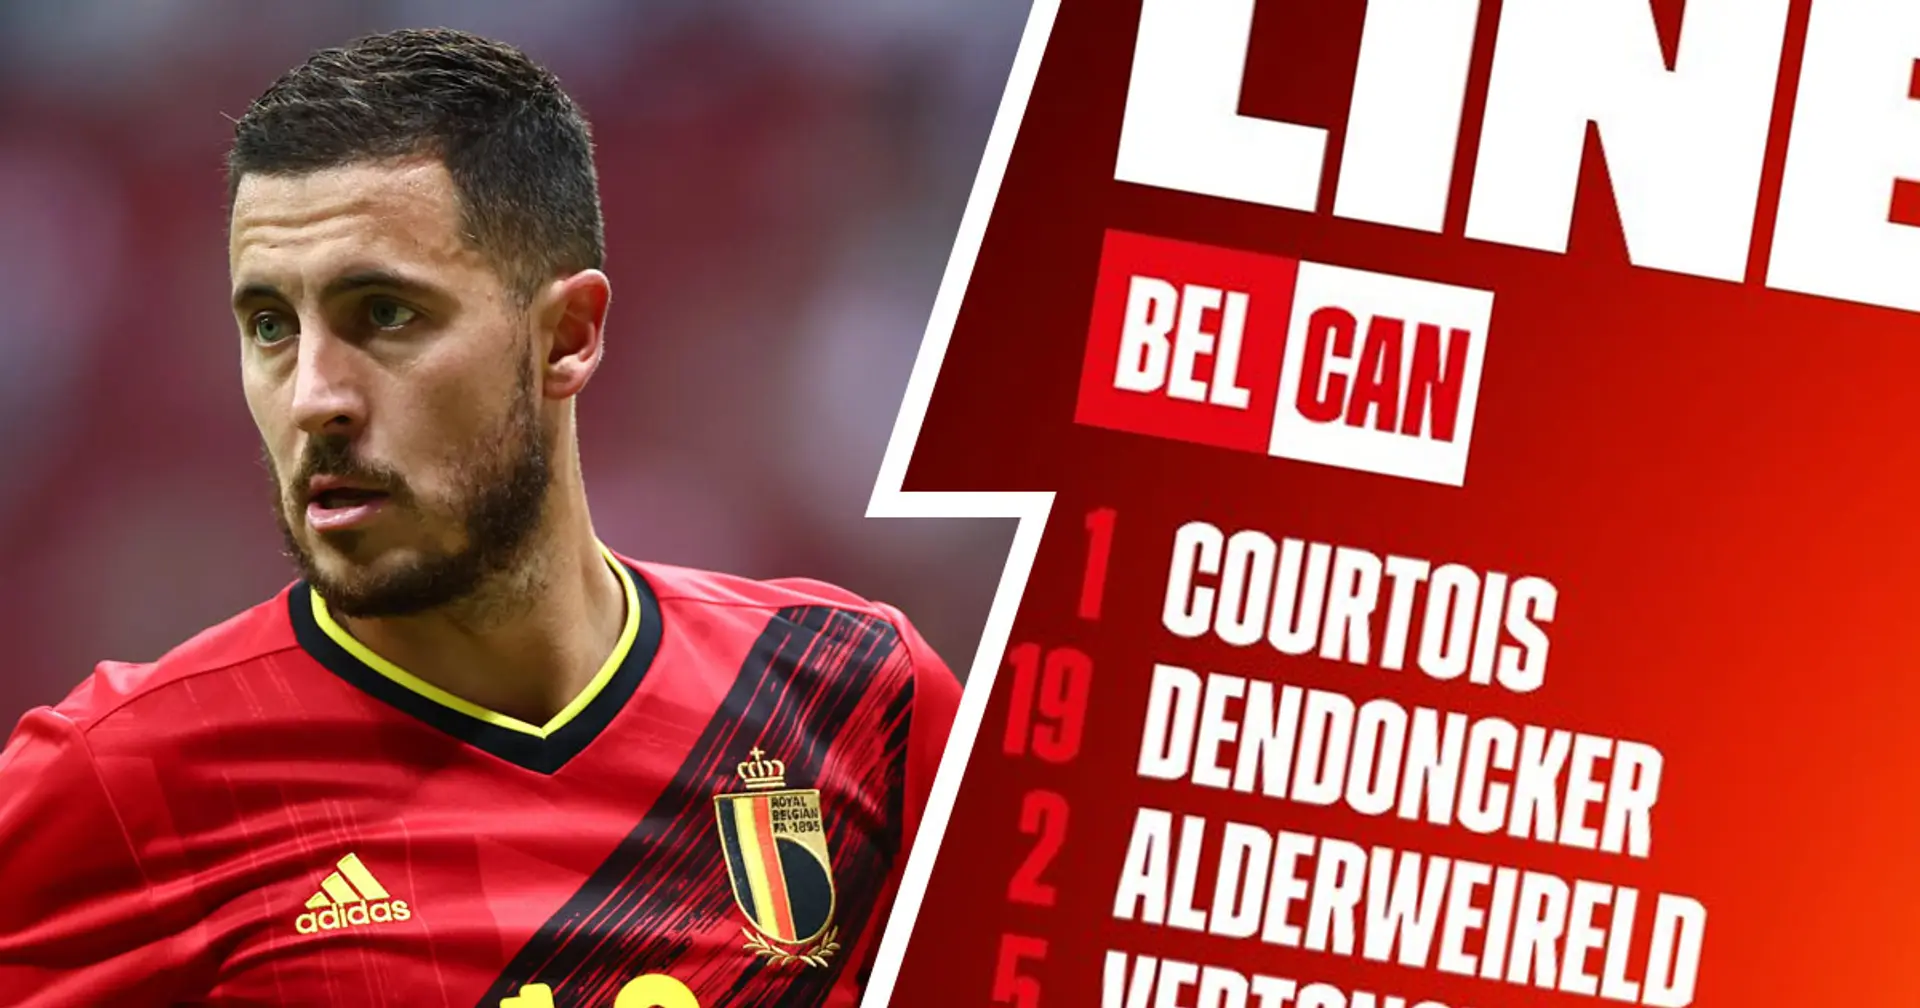 Hazard and Courtois start for Belgium in World Cup match v Canada